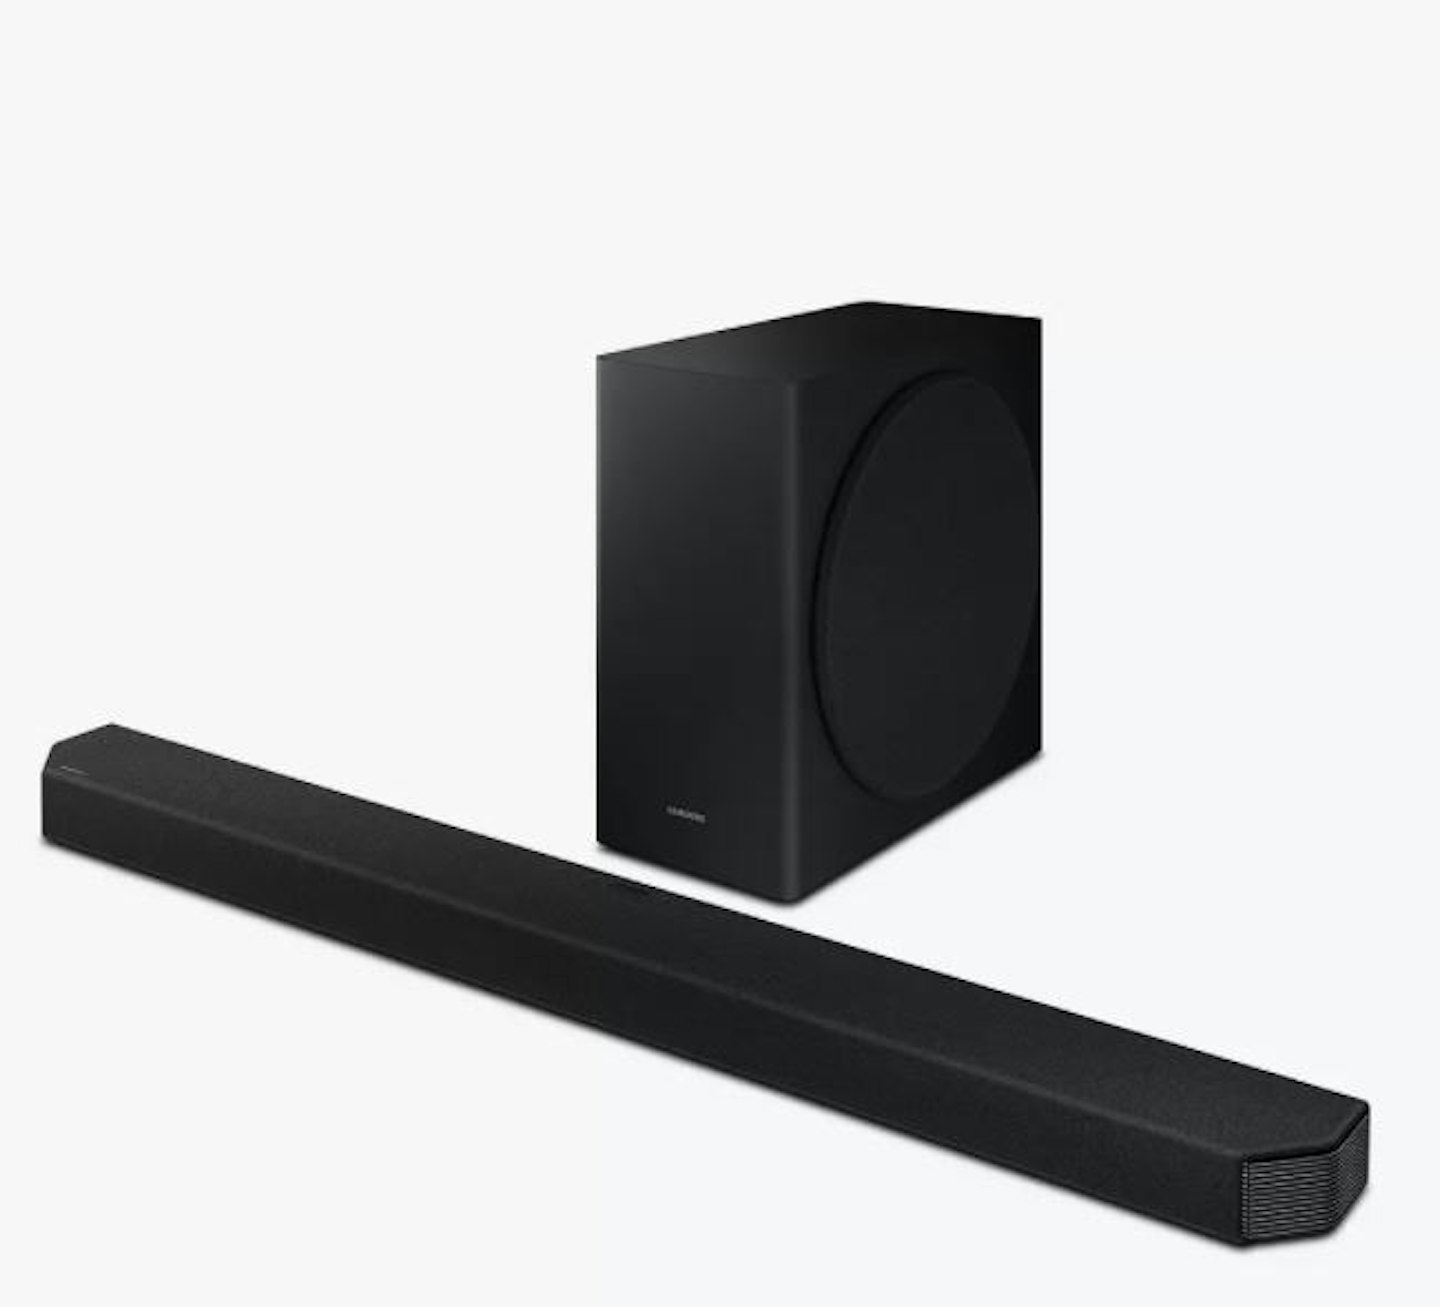 Samsung HW-Q900T Bluetooth Wi-Fi Cinematic Sound Bar with Dolby Atmos, Virtual DTS:X & Wireless Subwoofer